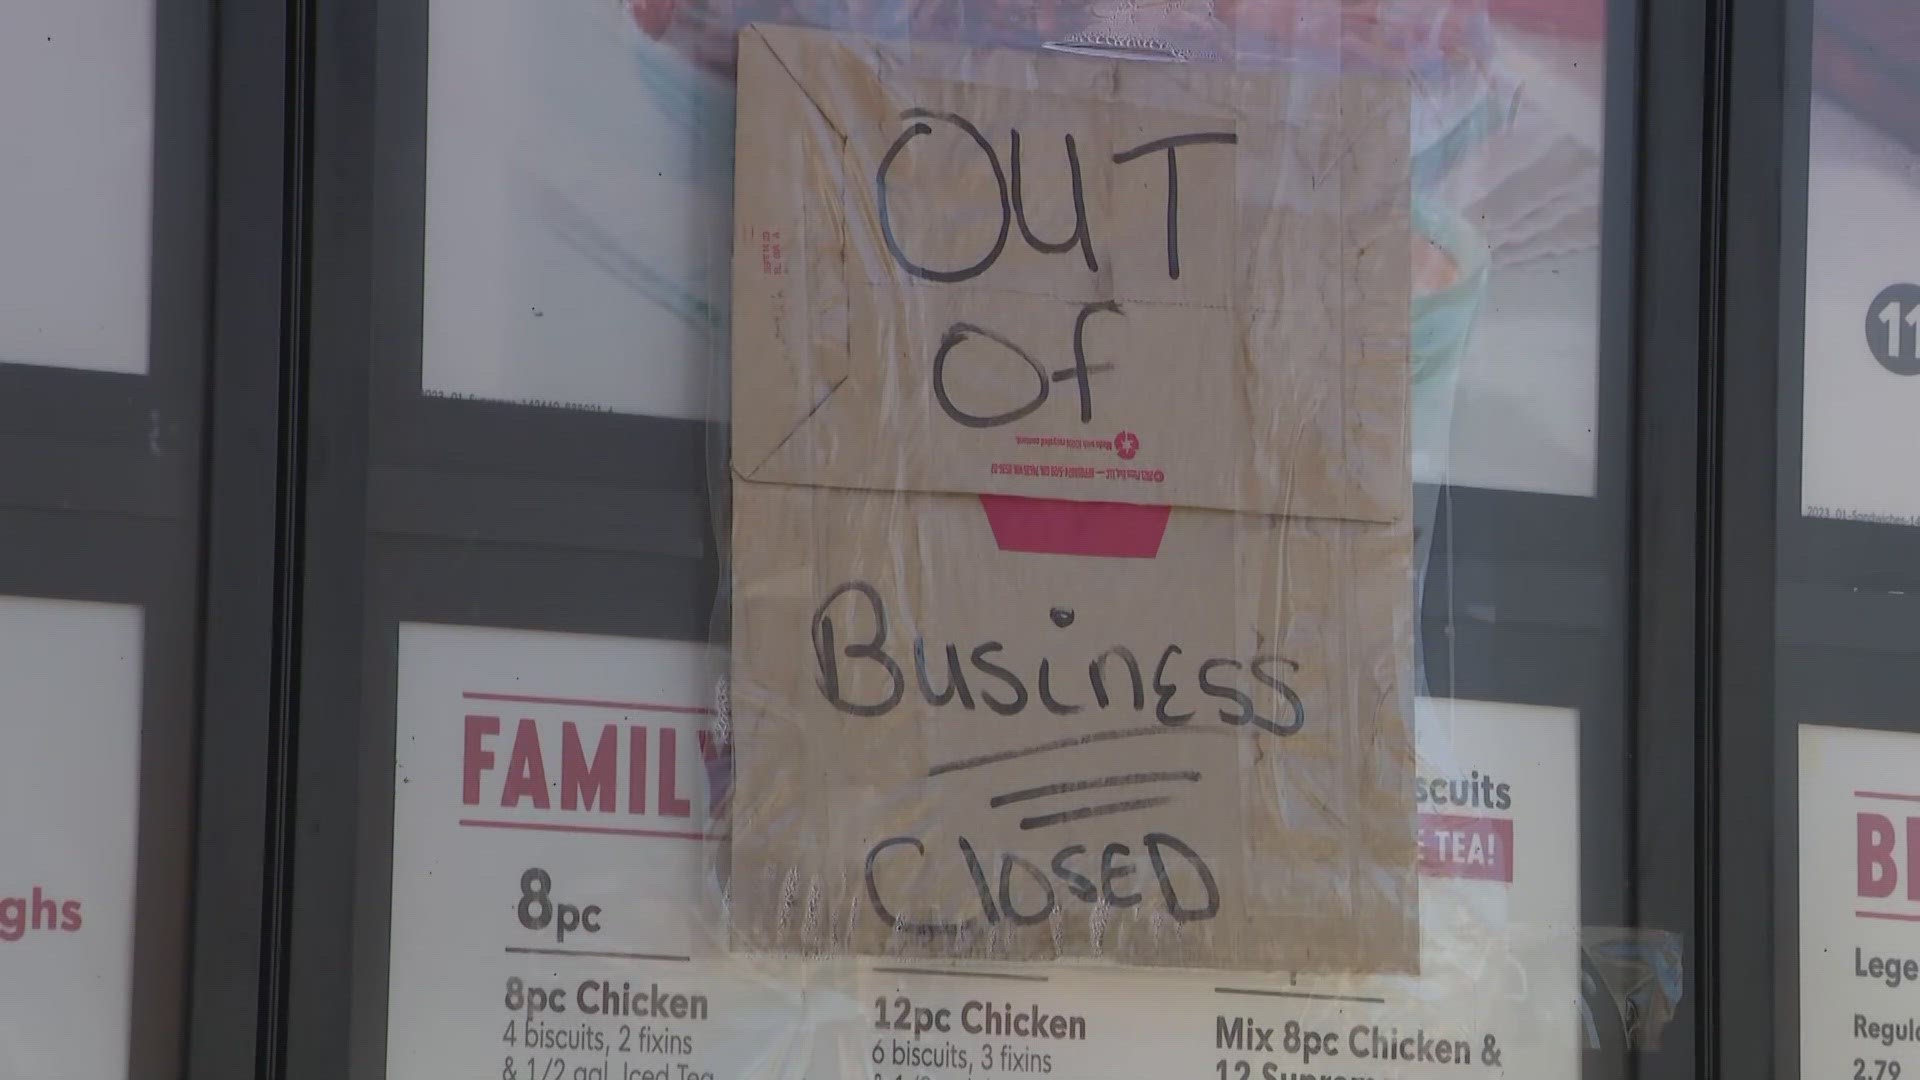 Despite what Google and even the Bojangles website may say, every one of the fast food locations in the state closed late last year.